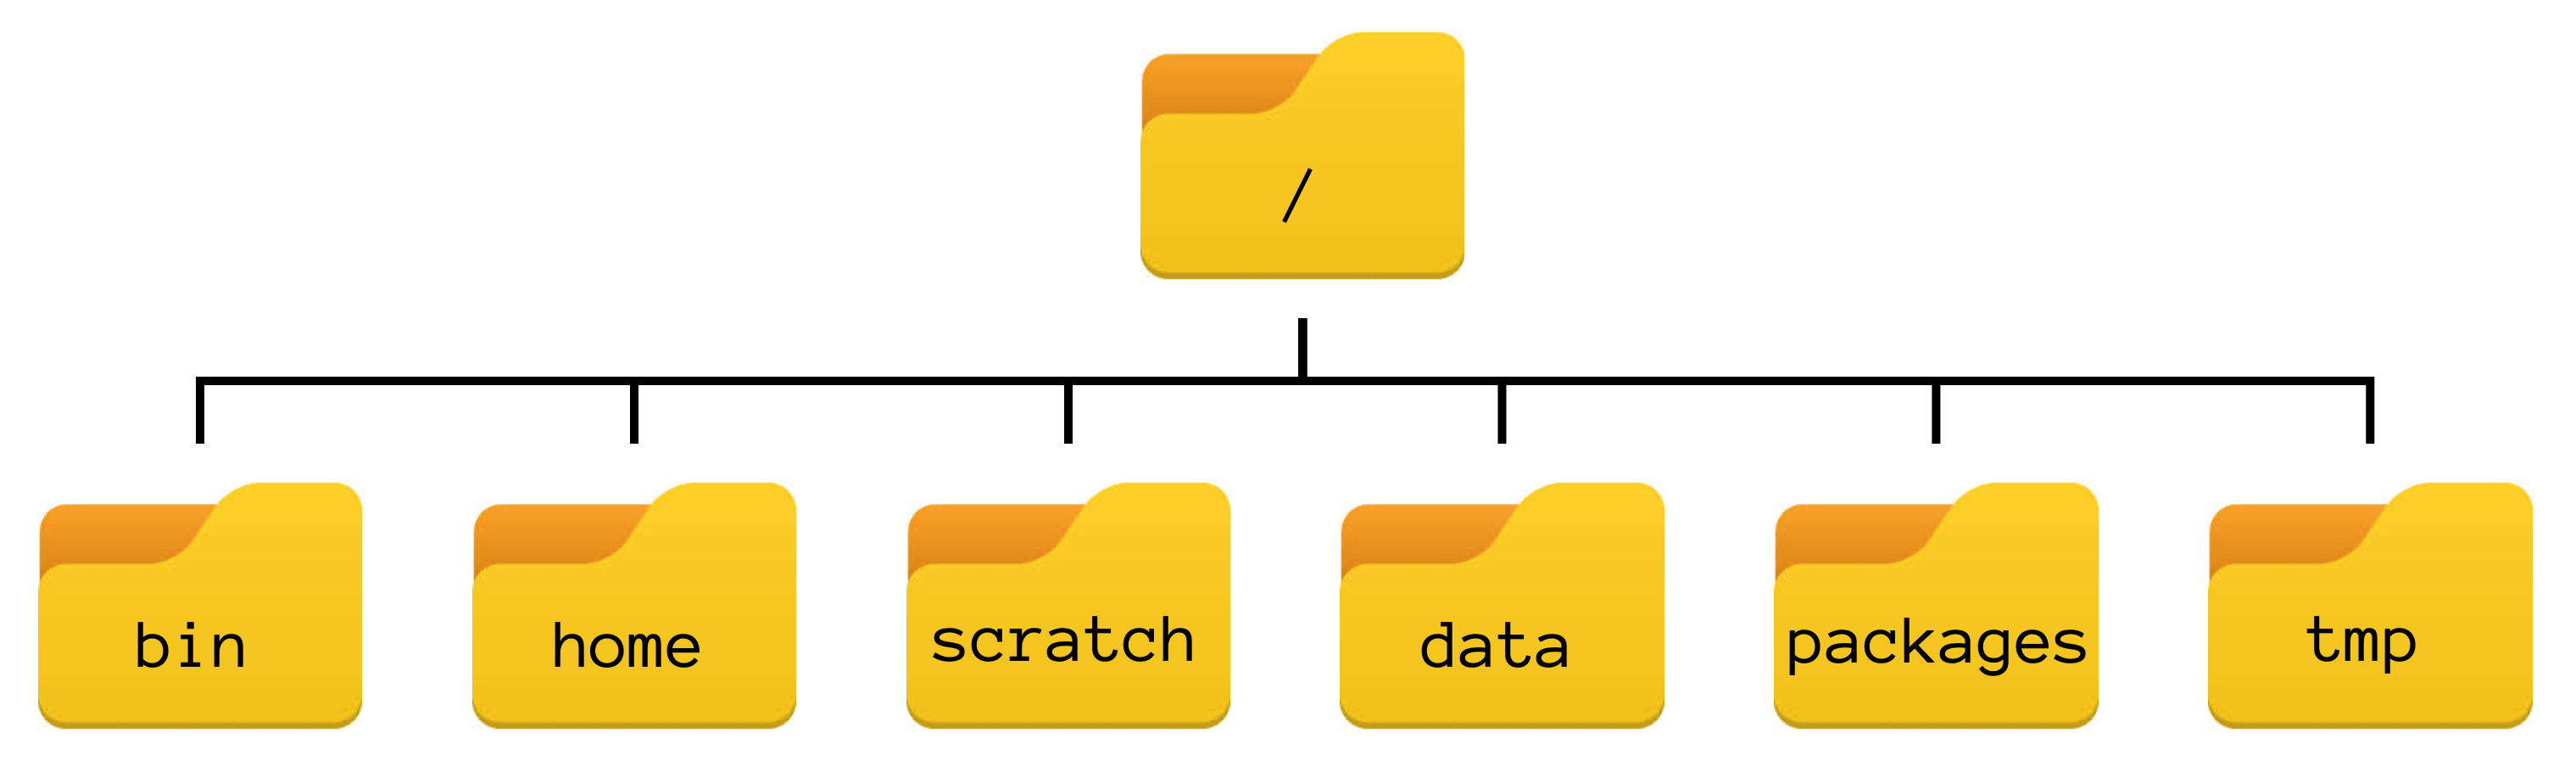 The file system is made up of a root directory that contains sub-directories
titled bin, data, home, scratch, packages, and tmp